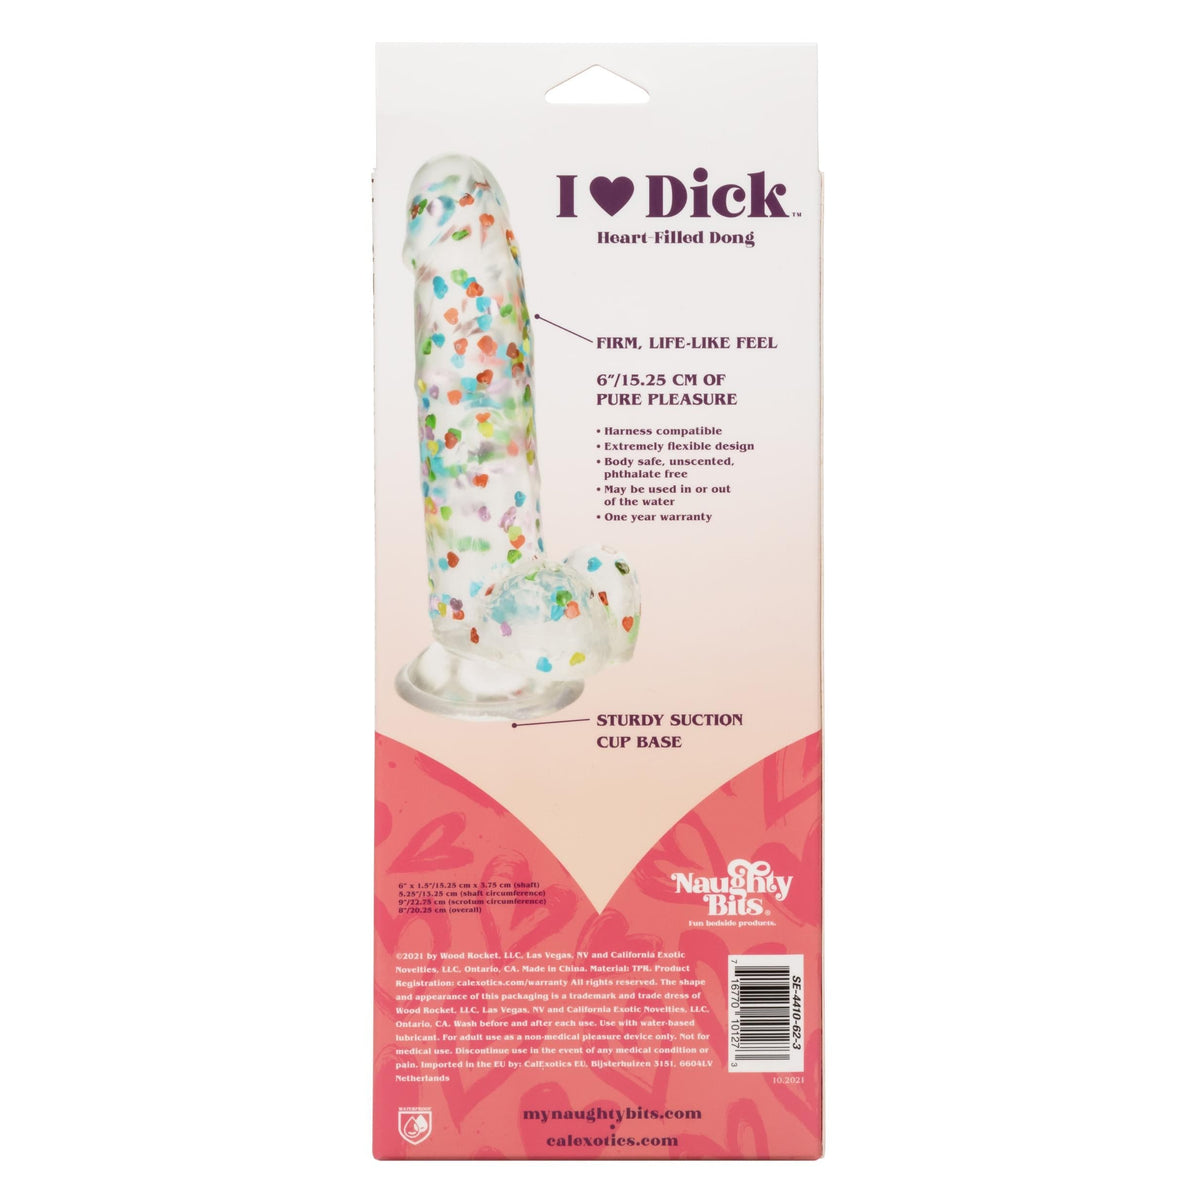 naughty bits i love dick heart filled dong